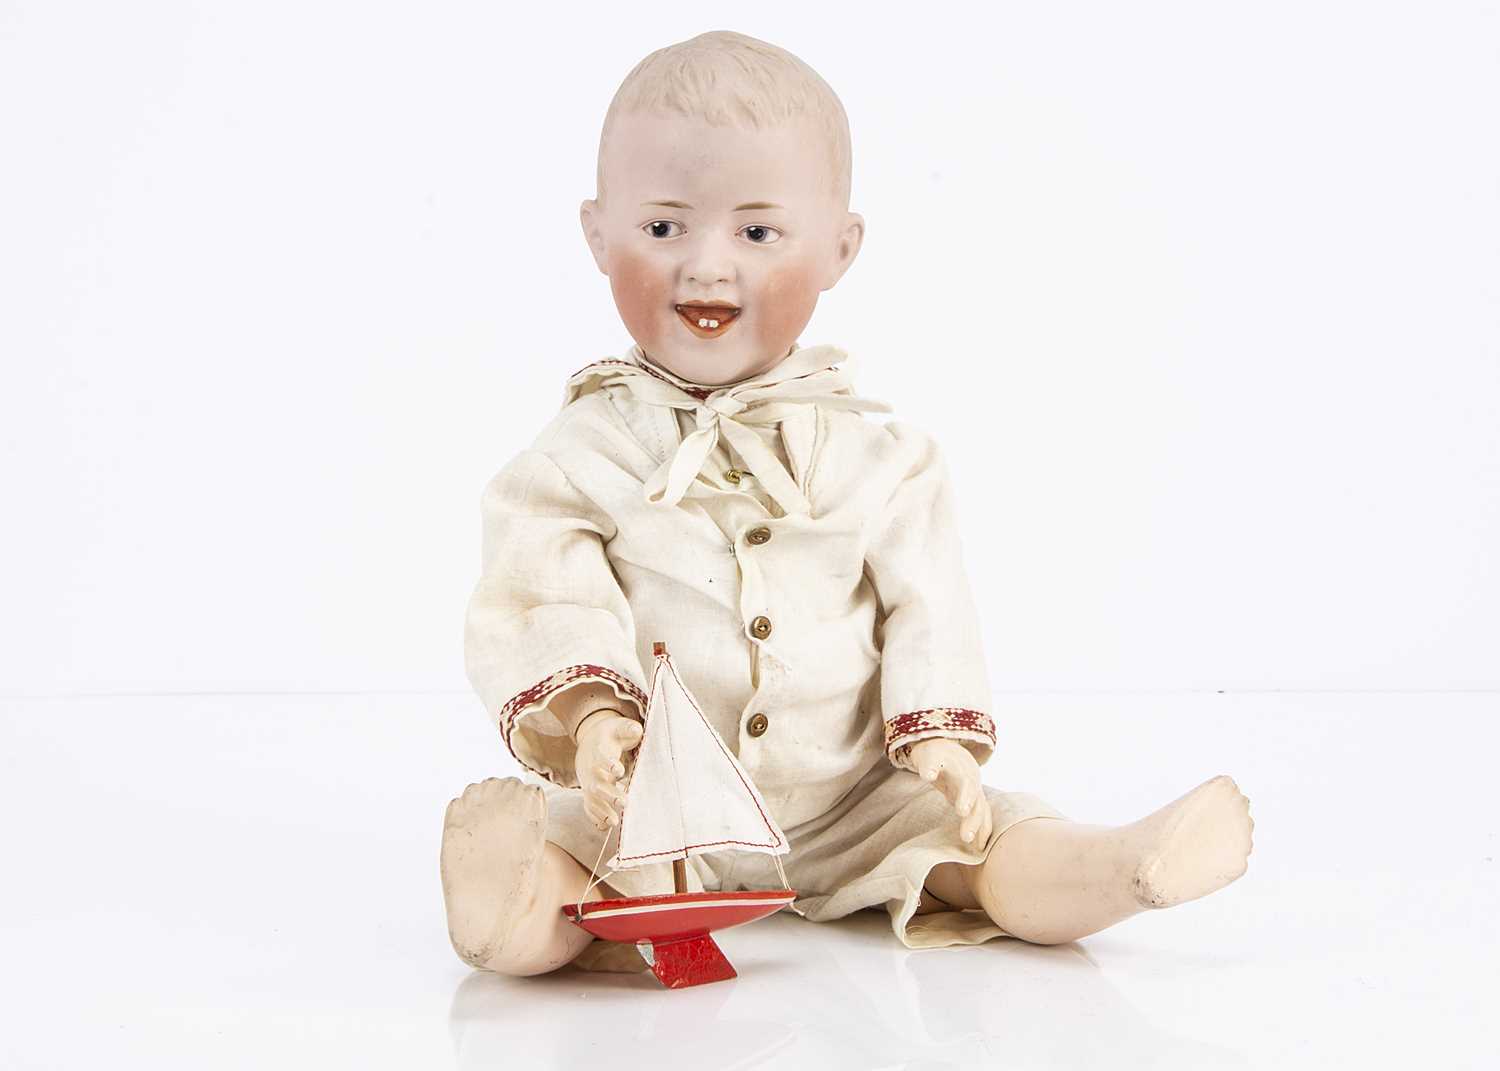 A Gebruder Heubach character laughing boy doll, - Image 2 of 2